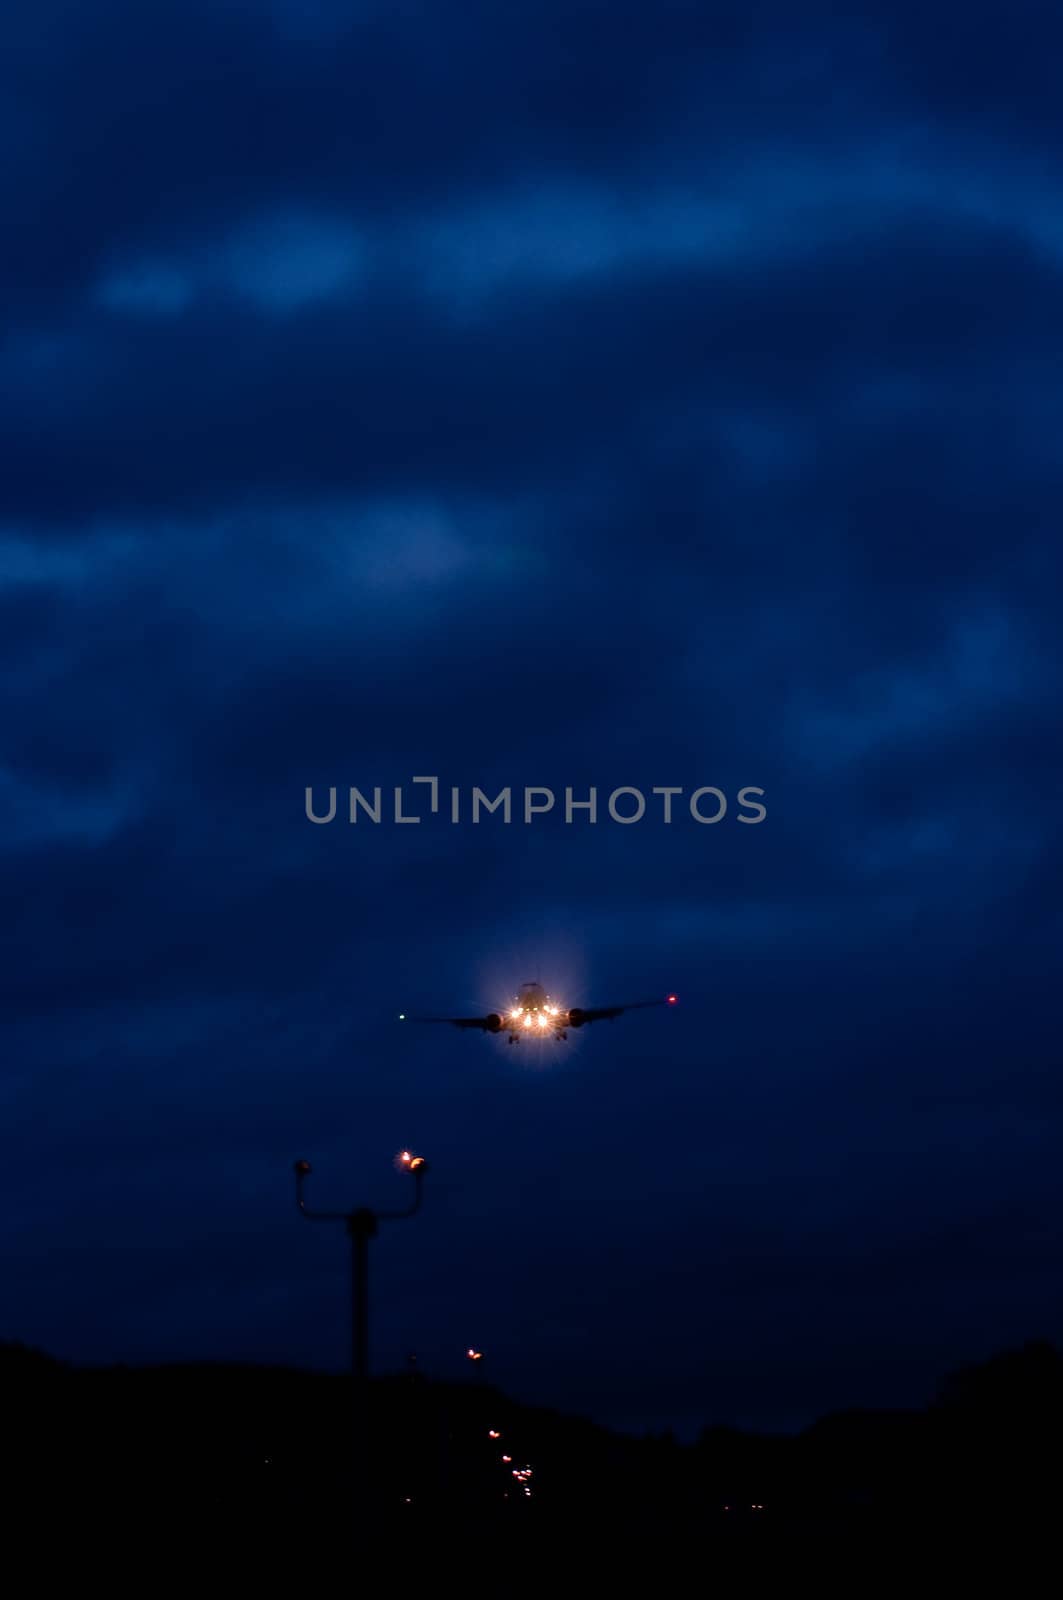 Airplane landing in the dark with the airport lights showing